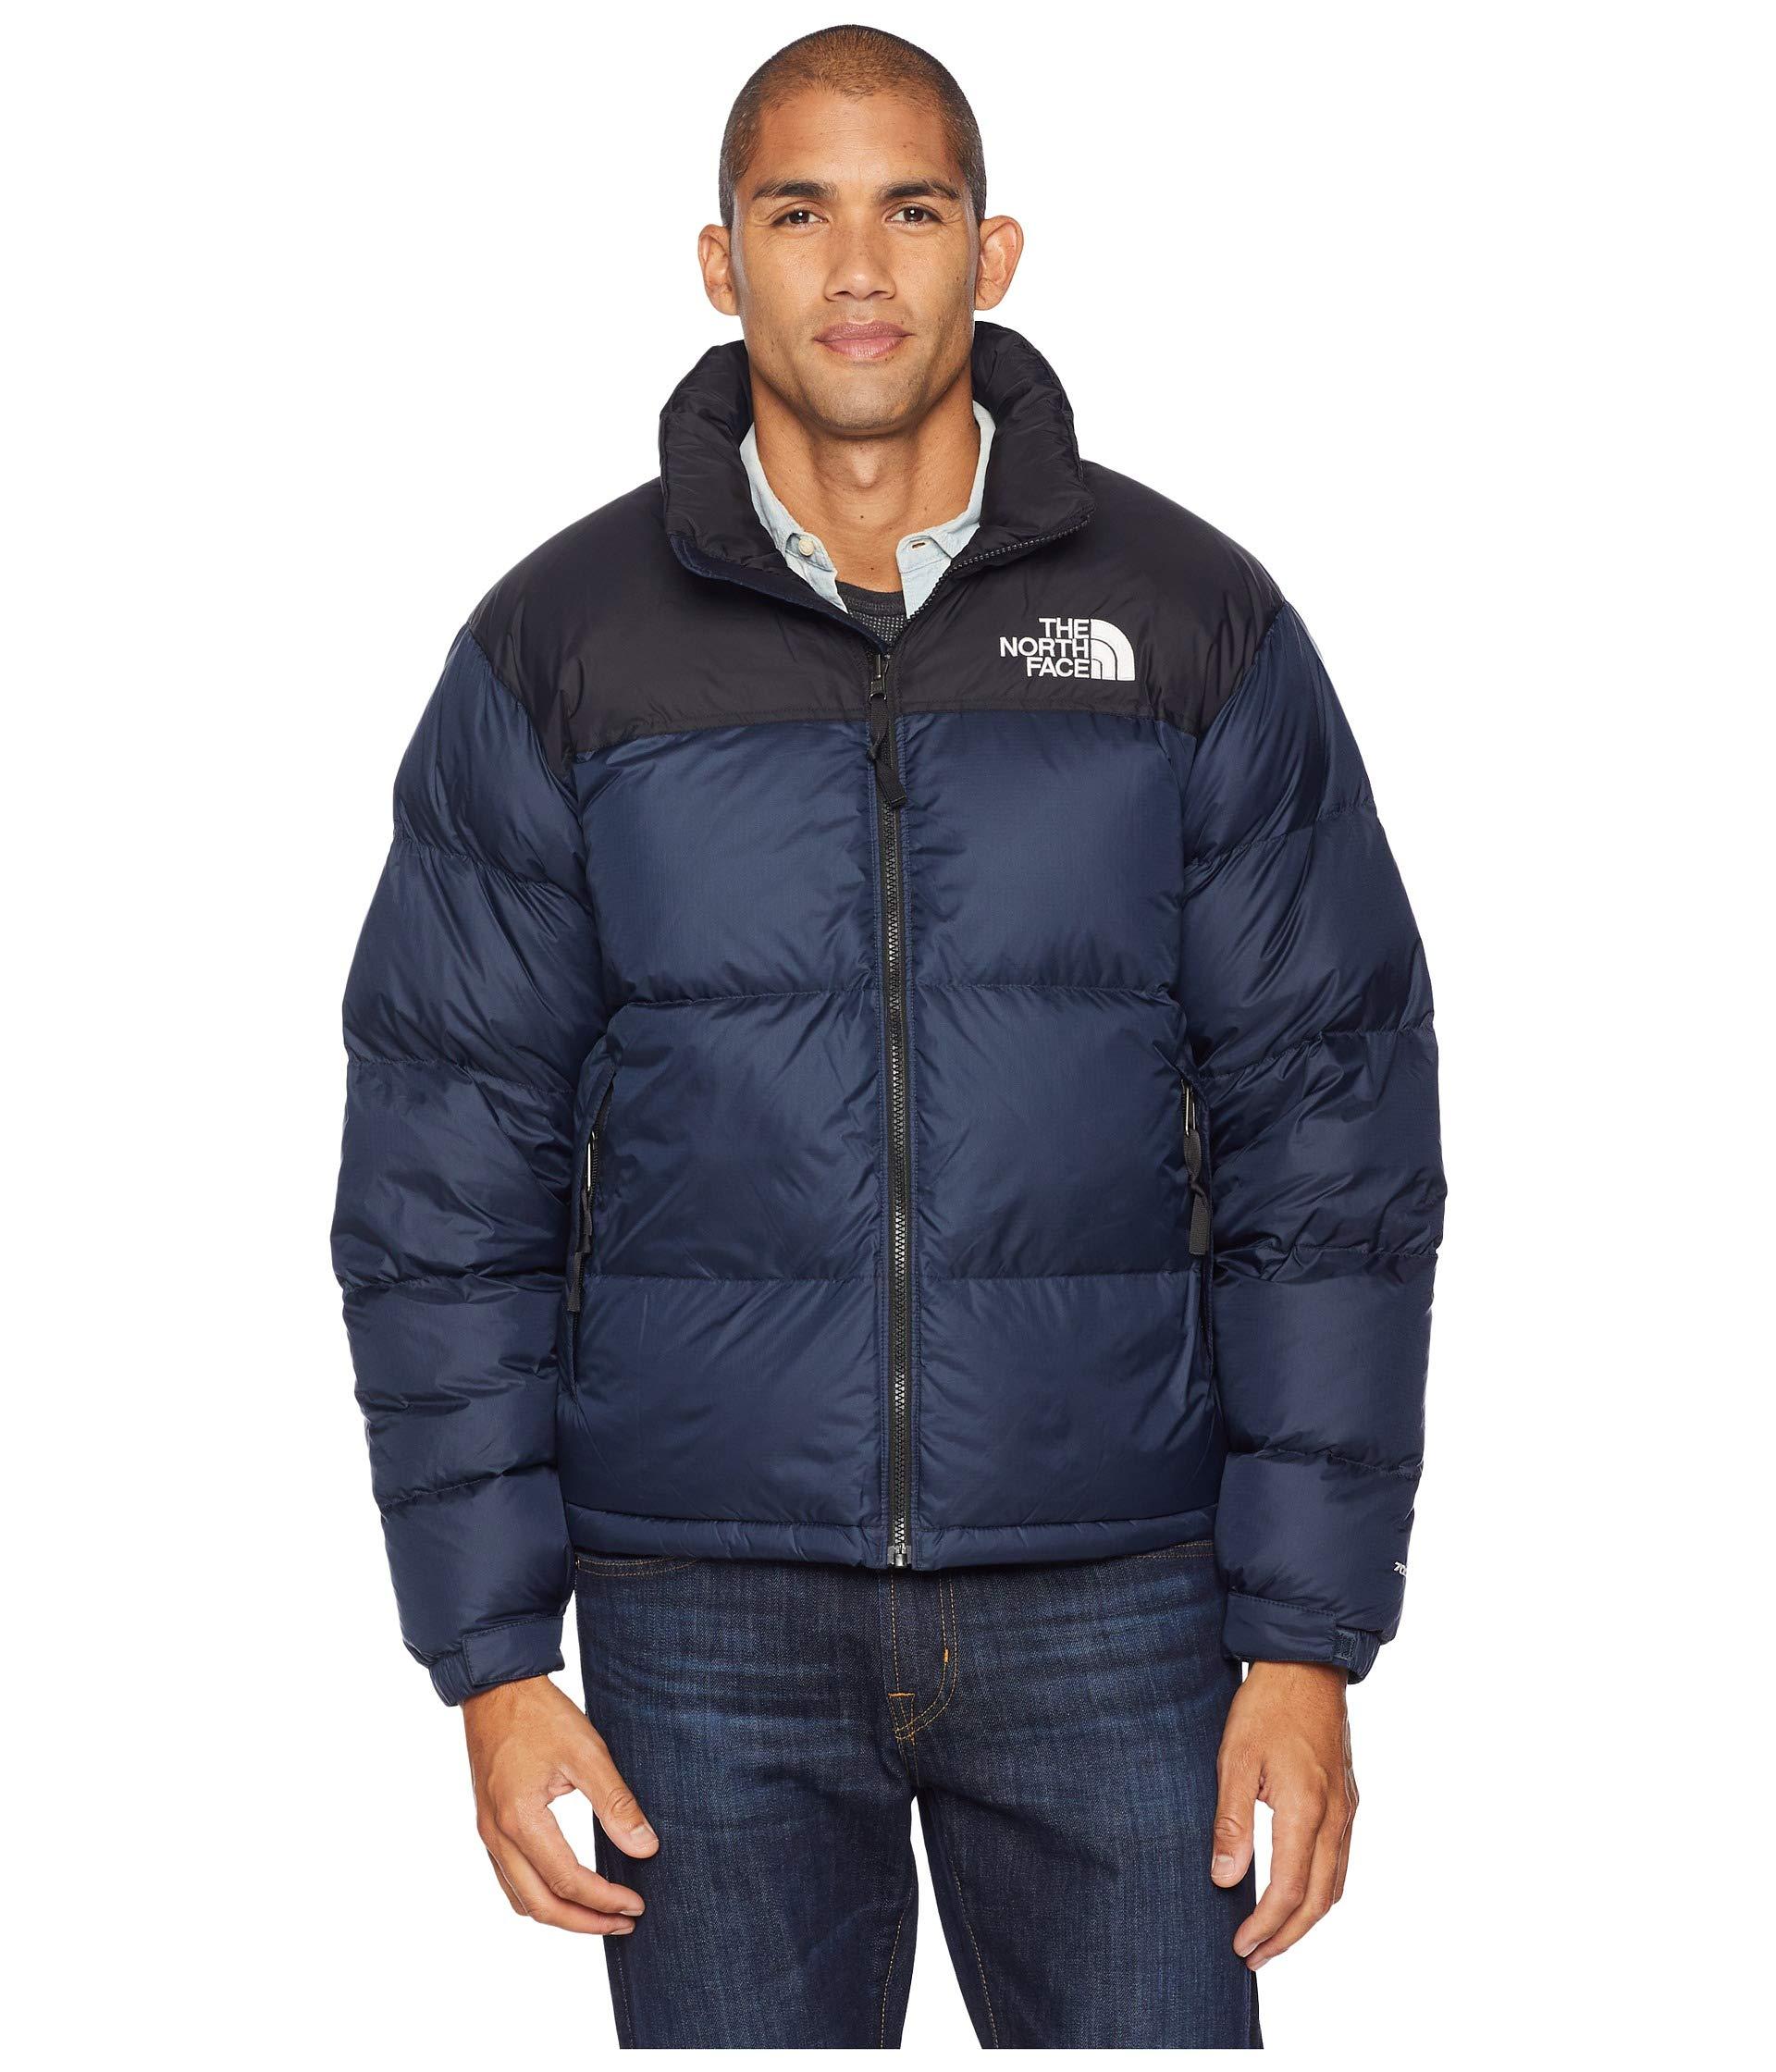 The North Face 1996 Retro Nuptse Jacket In Blue For Men, 50% OFF